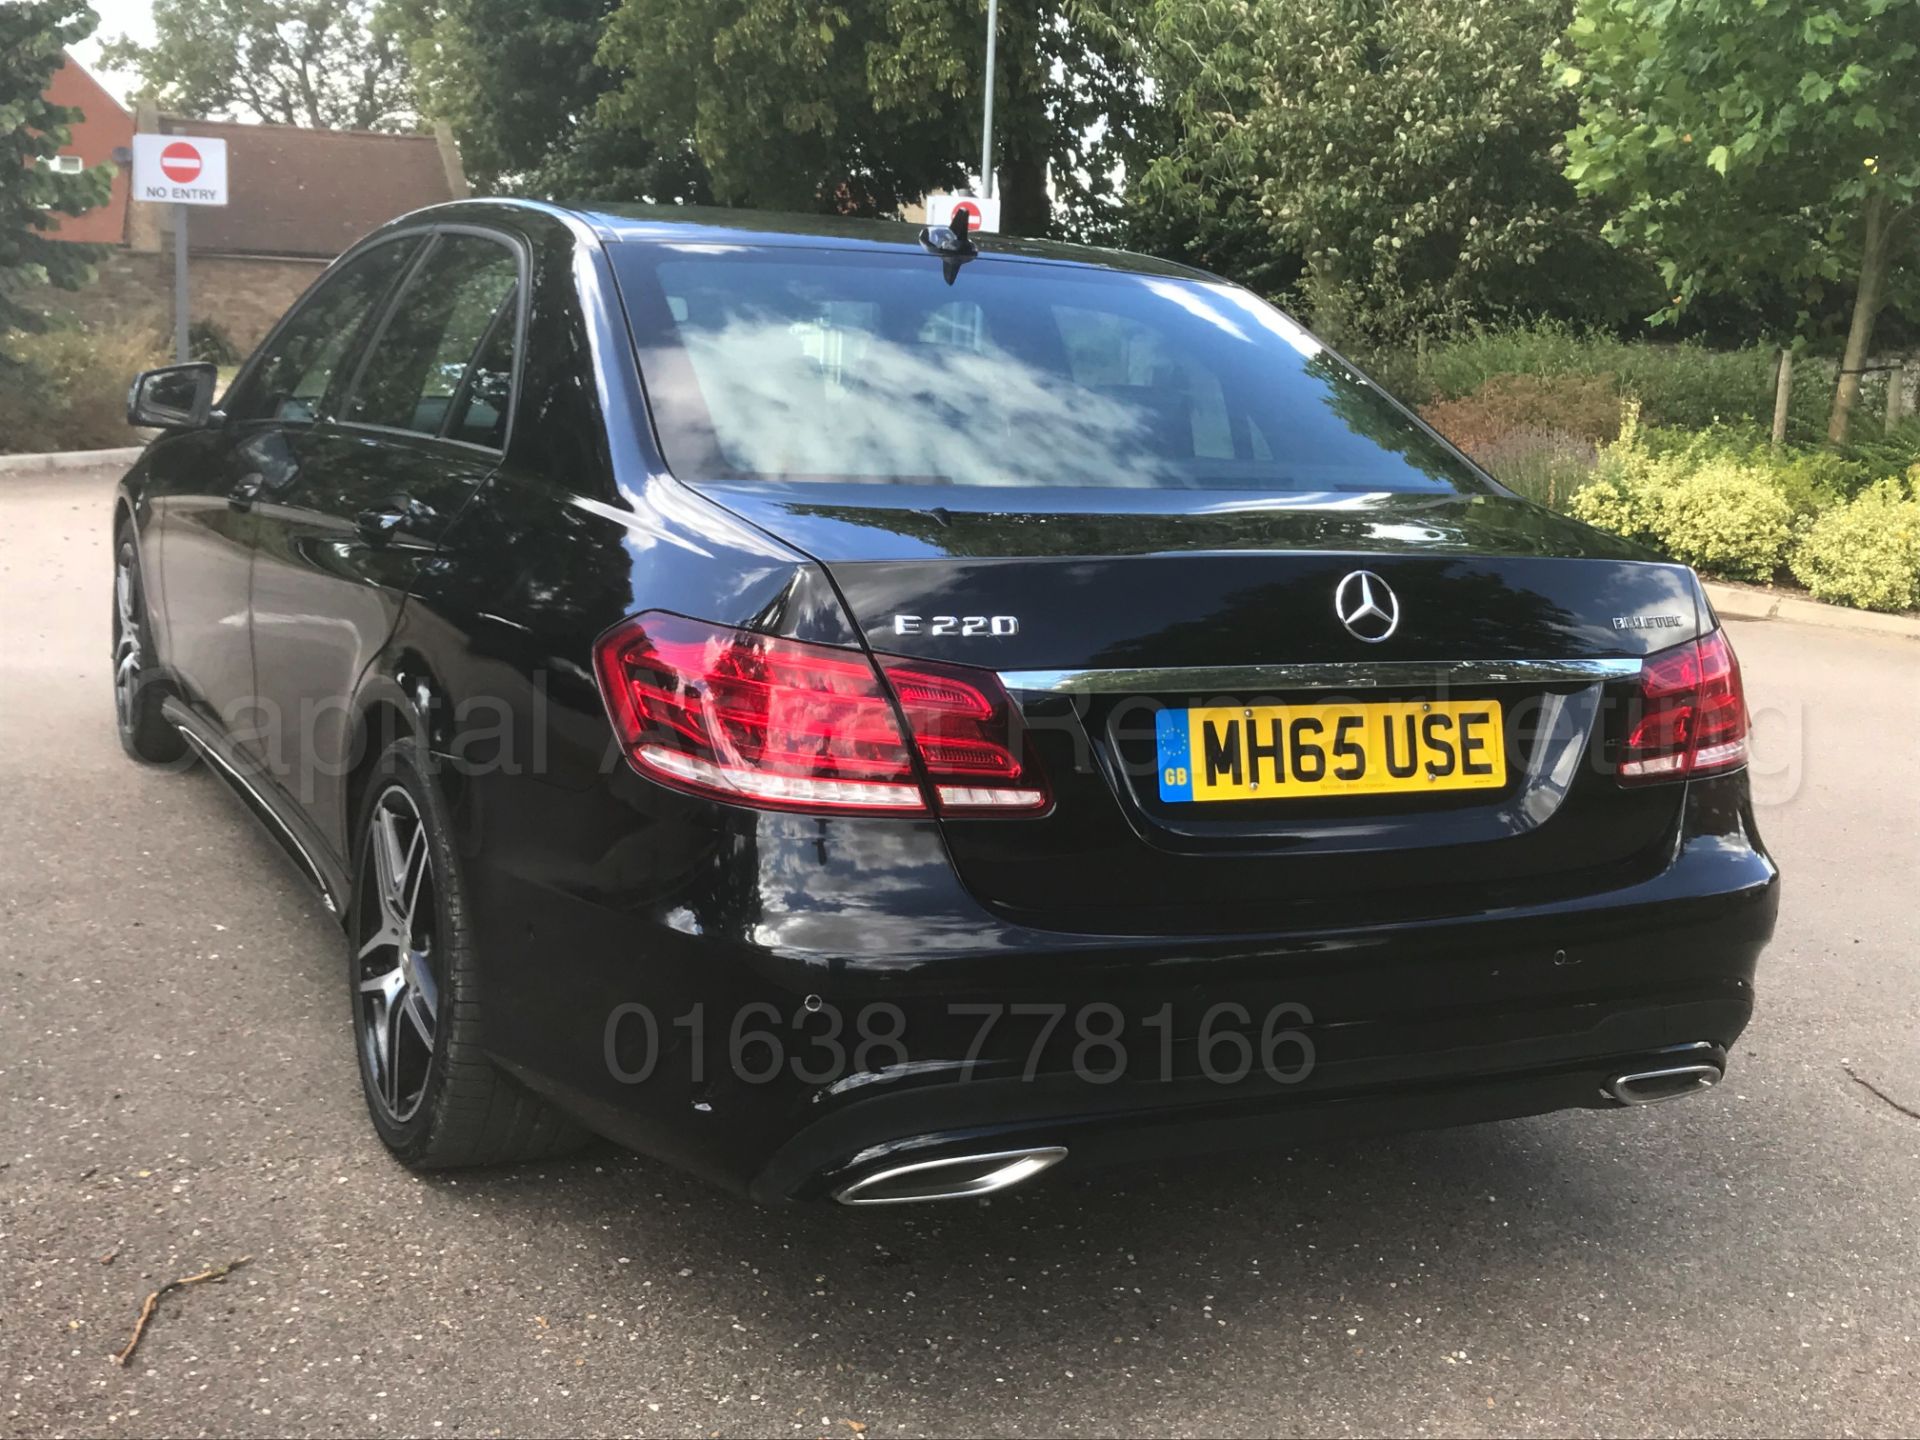 MERCEDES-BENZ E220D *AMG - NIGHT EDITION* SALOON (2016) '7G AUTO - LEATHER - SAT NAV' *LOW MILES* - Image 5 of 43